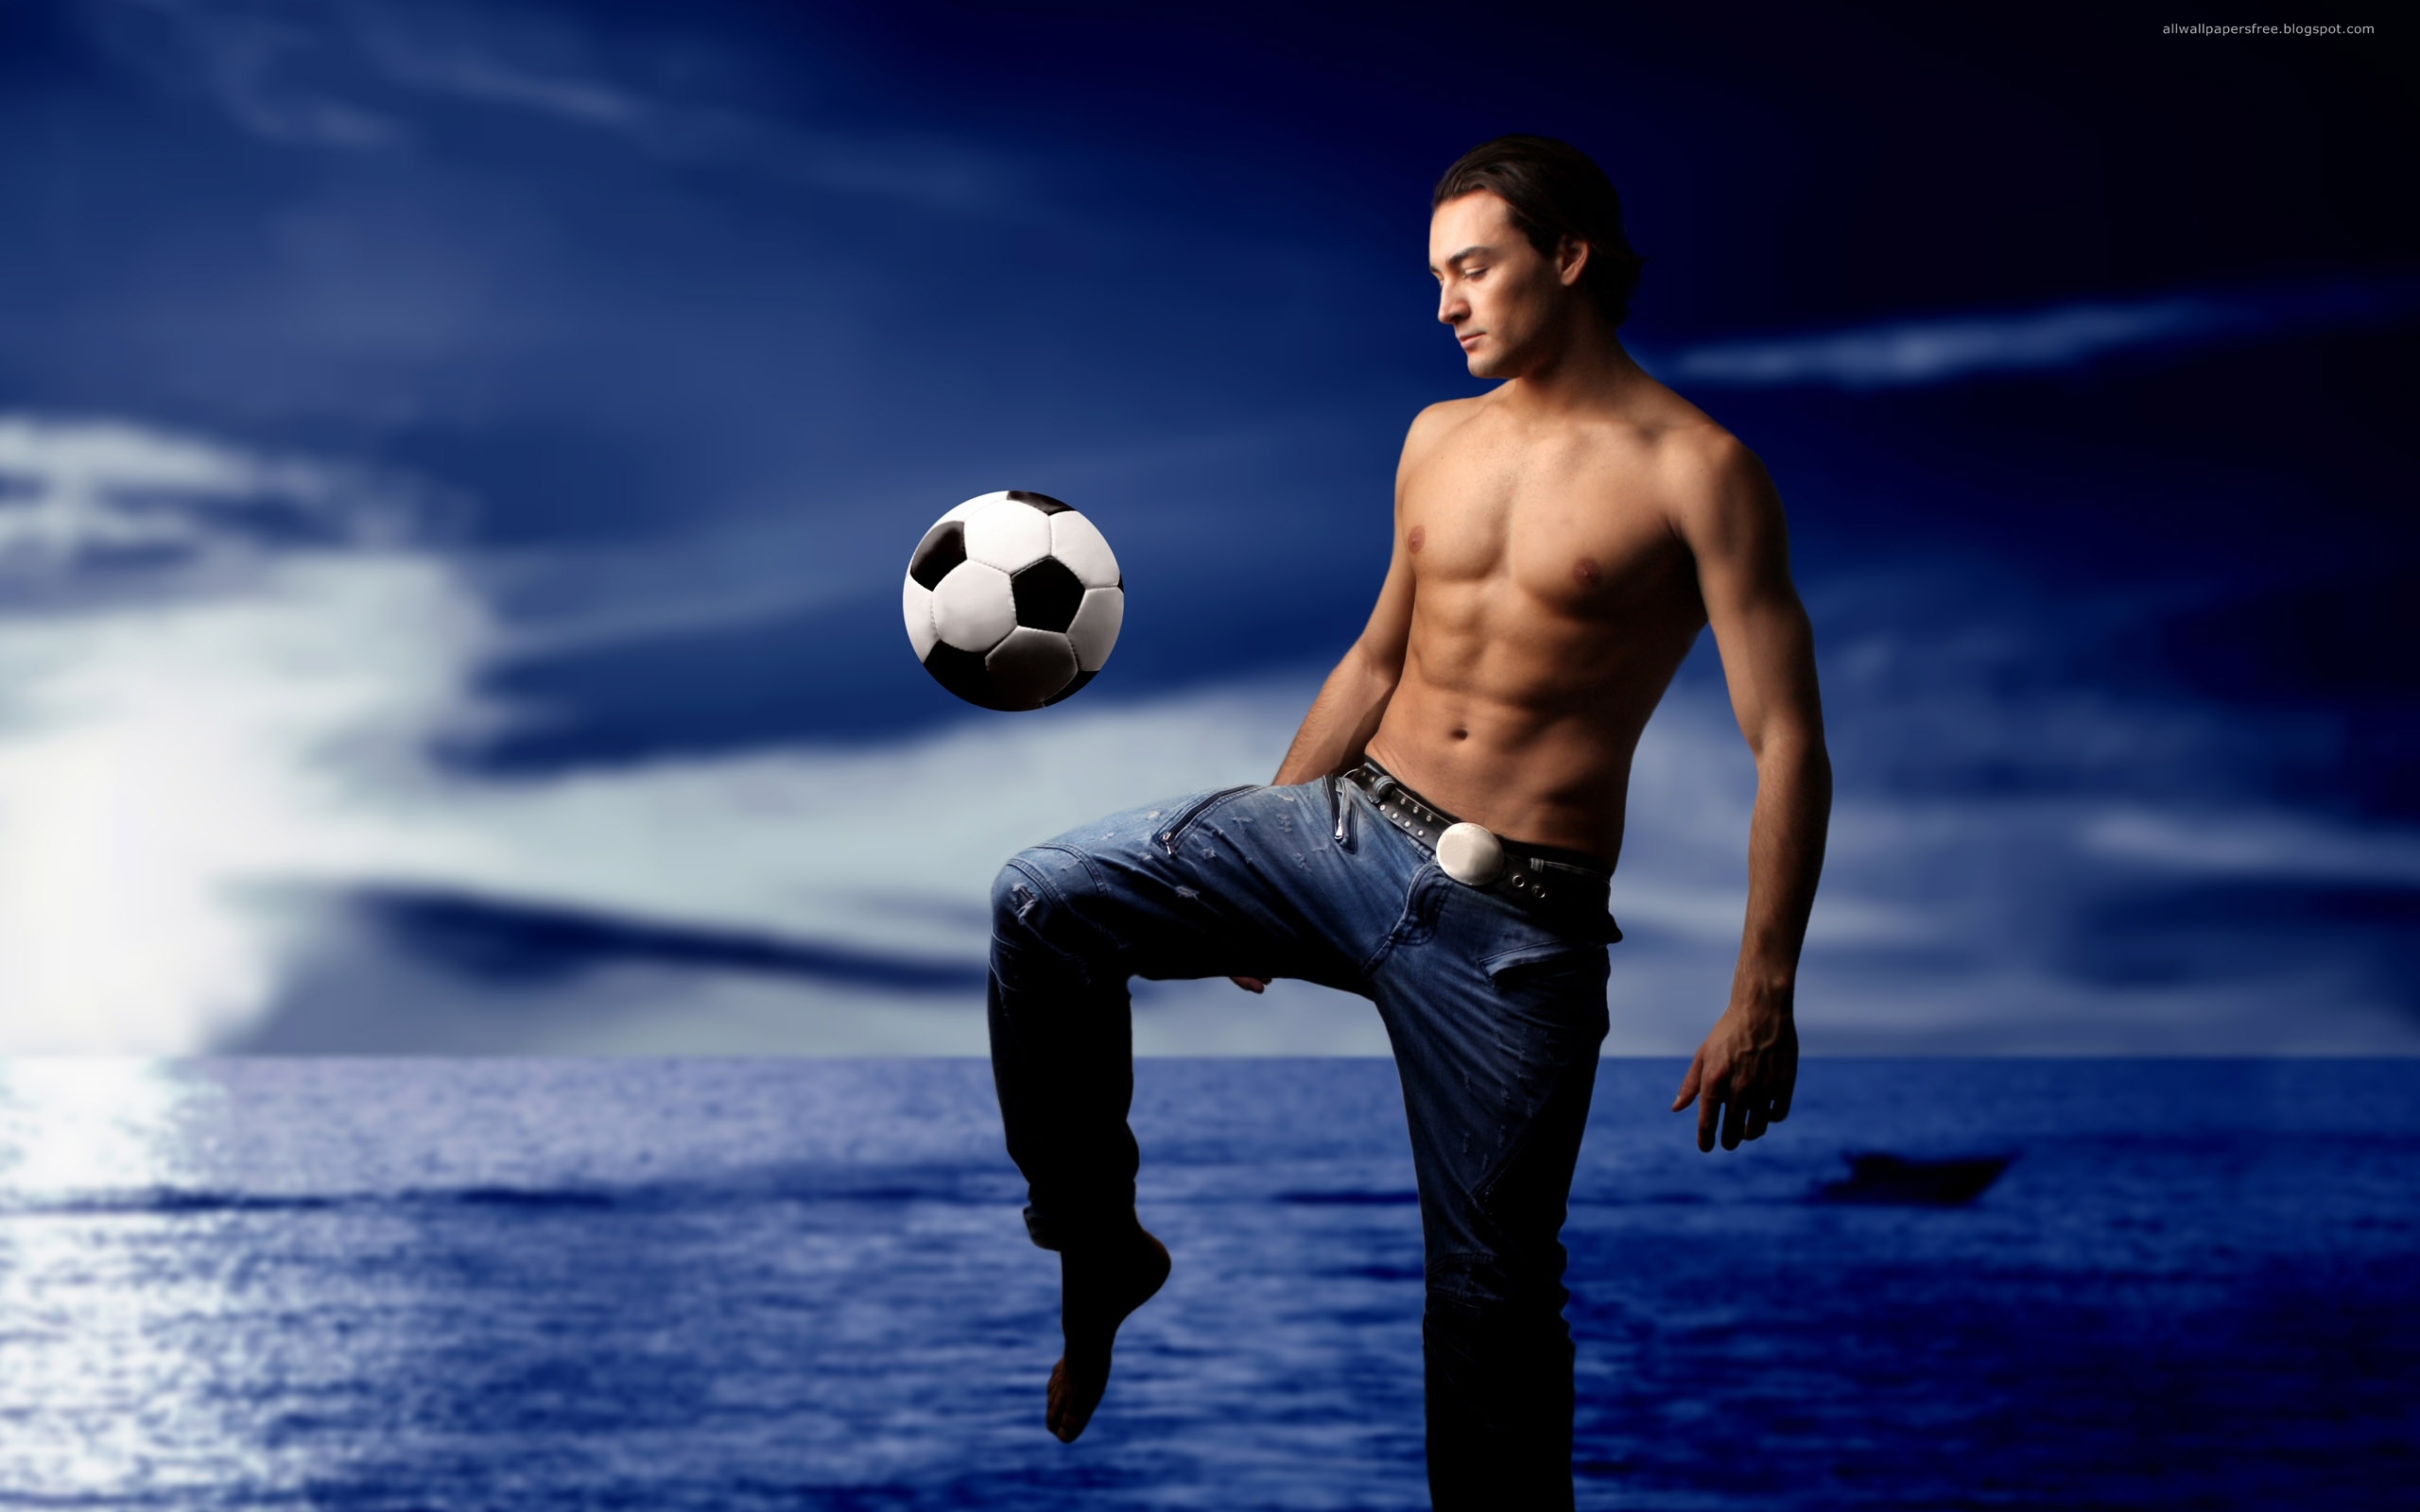 Image Sexy Football Player Wallpaper And Stock Photos